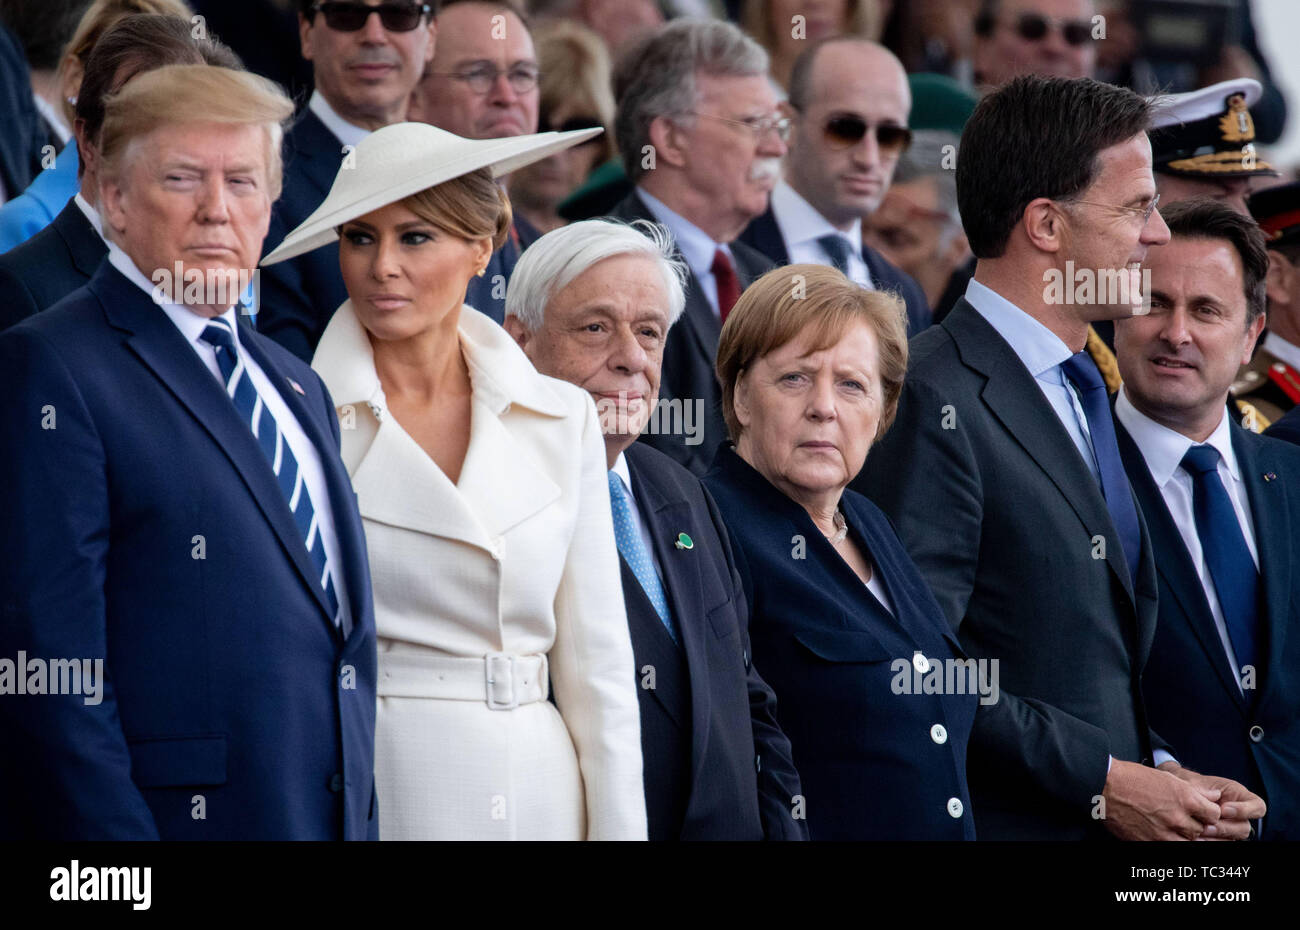 Portsmouth, UK. 05th June, 2019. Donald Trump, President of the USA, (l-r)  his wife Melania, First Lady of the USA, Prokopis Pavlopoulos, President of  Greece, Chancellor Angela Merkel (CDU), Mark Rutte, Prime